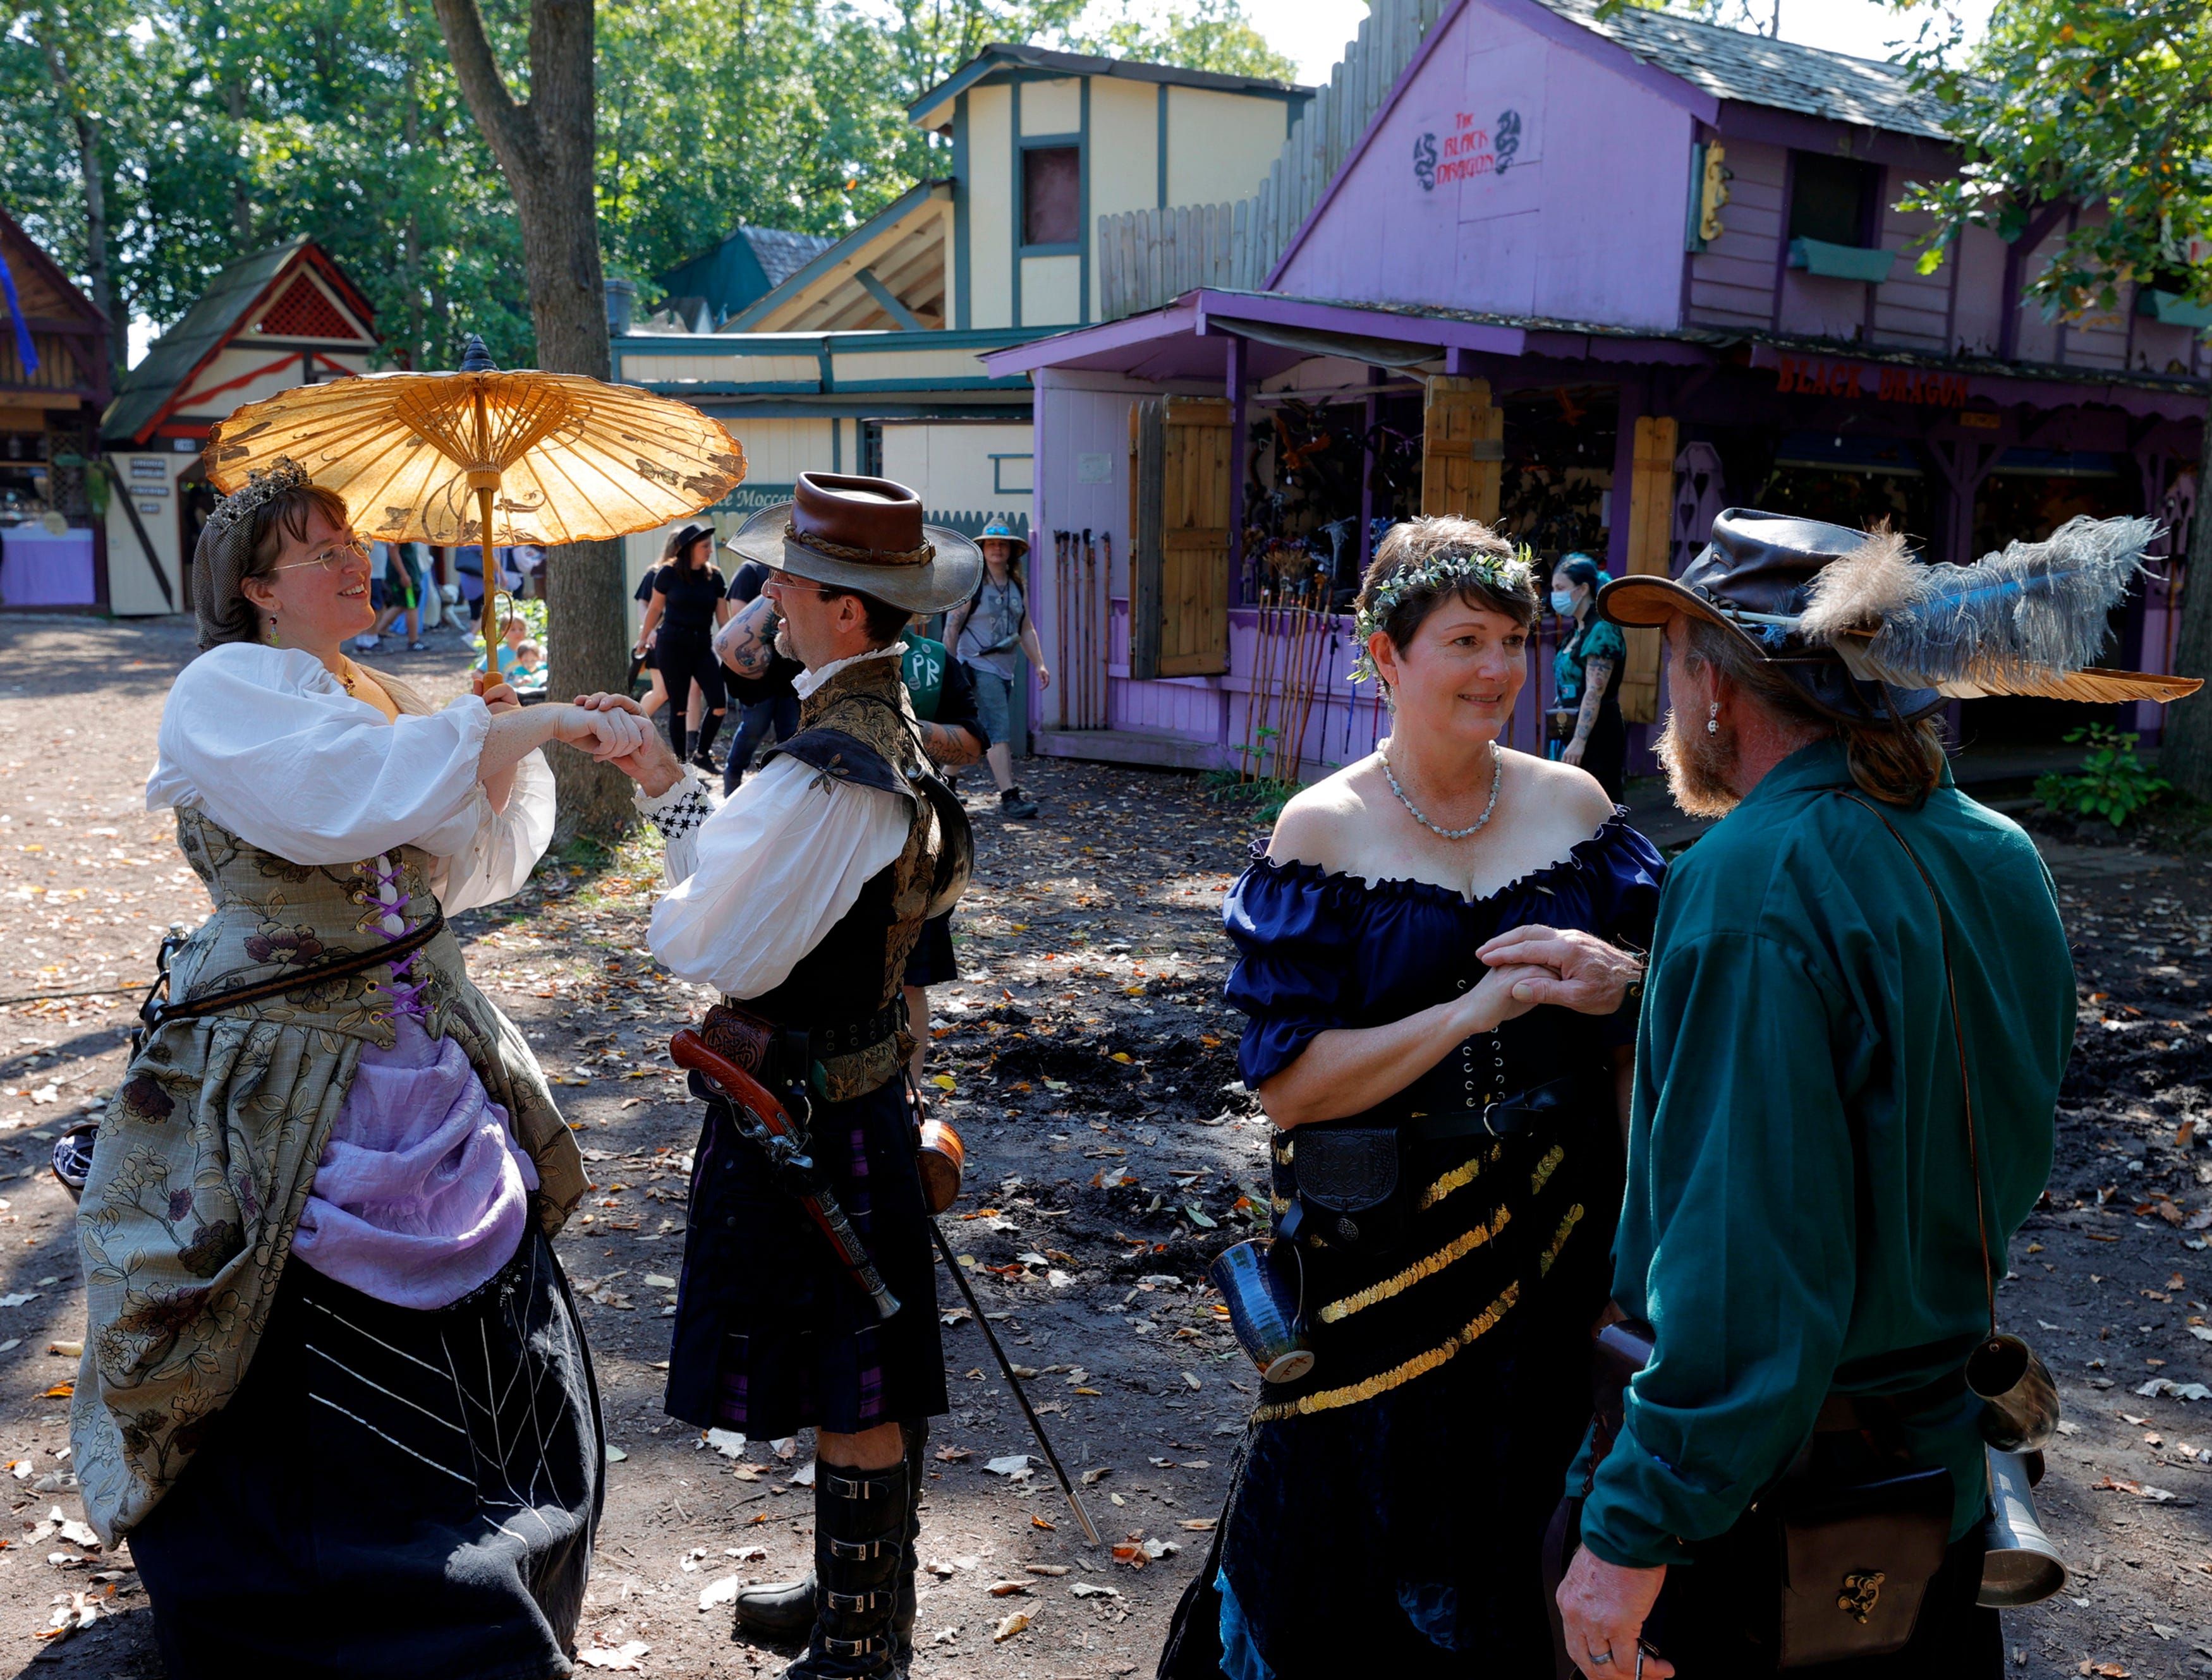 Michigan Renaissance Festival is a great place to people watch